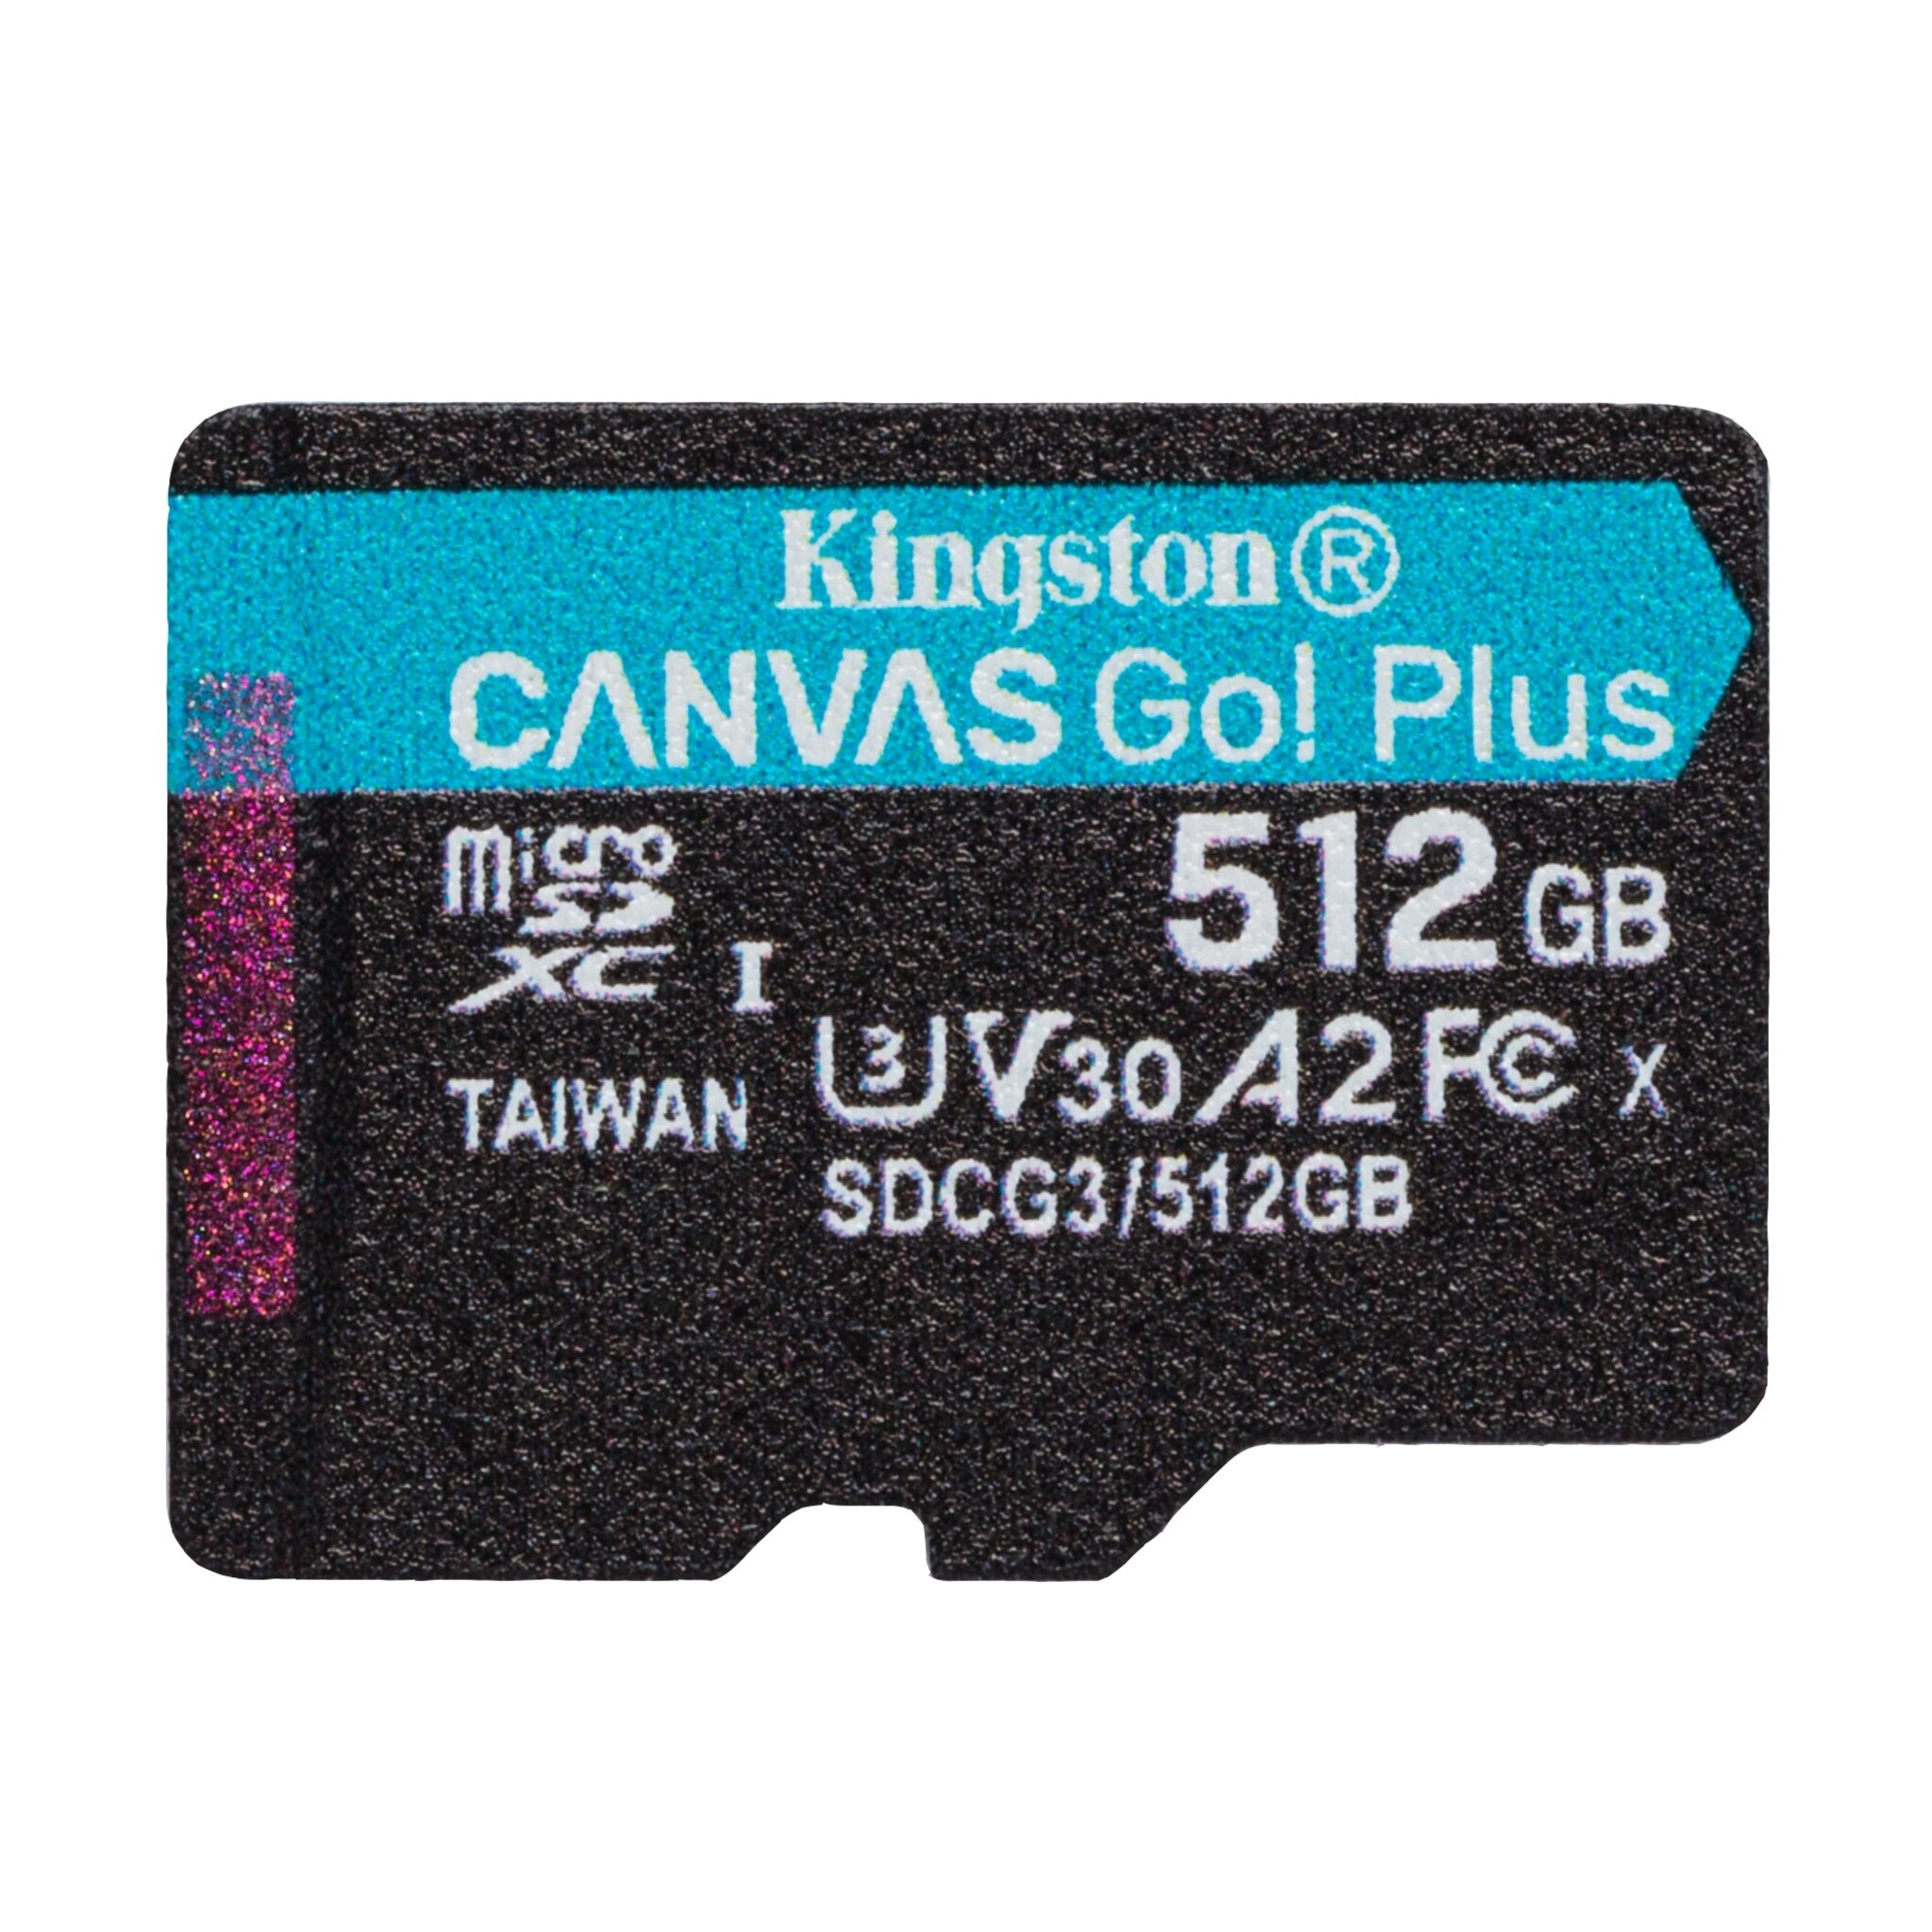 Kingston Canvas Go Plus Micro SD SDCG3 Series (64GB / 128GB / 256GB / 512GB) with 4K Video Production, Suitable for Action Cams, Drones and Mobile Device